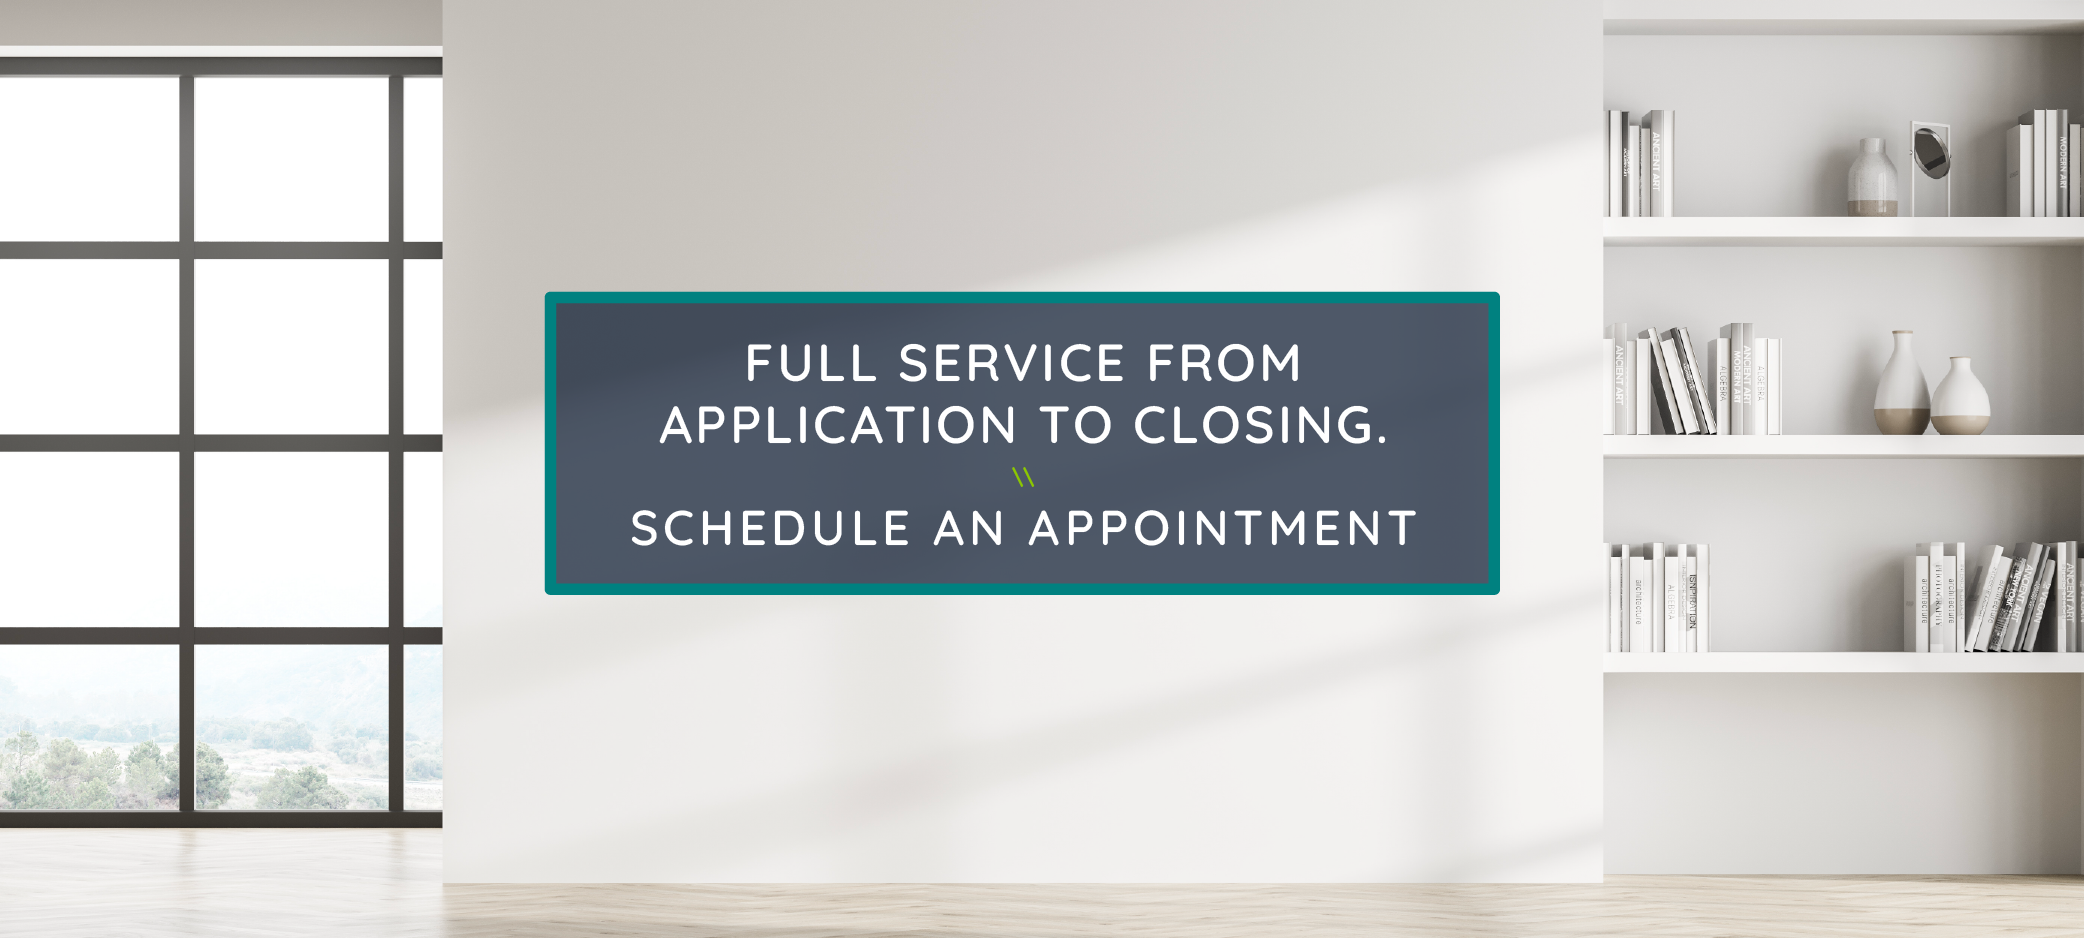 Full service from application to closing.